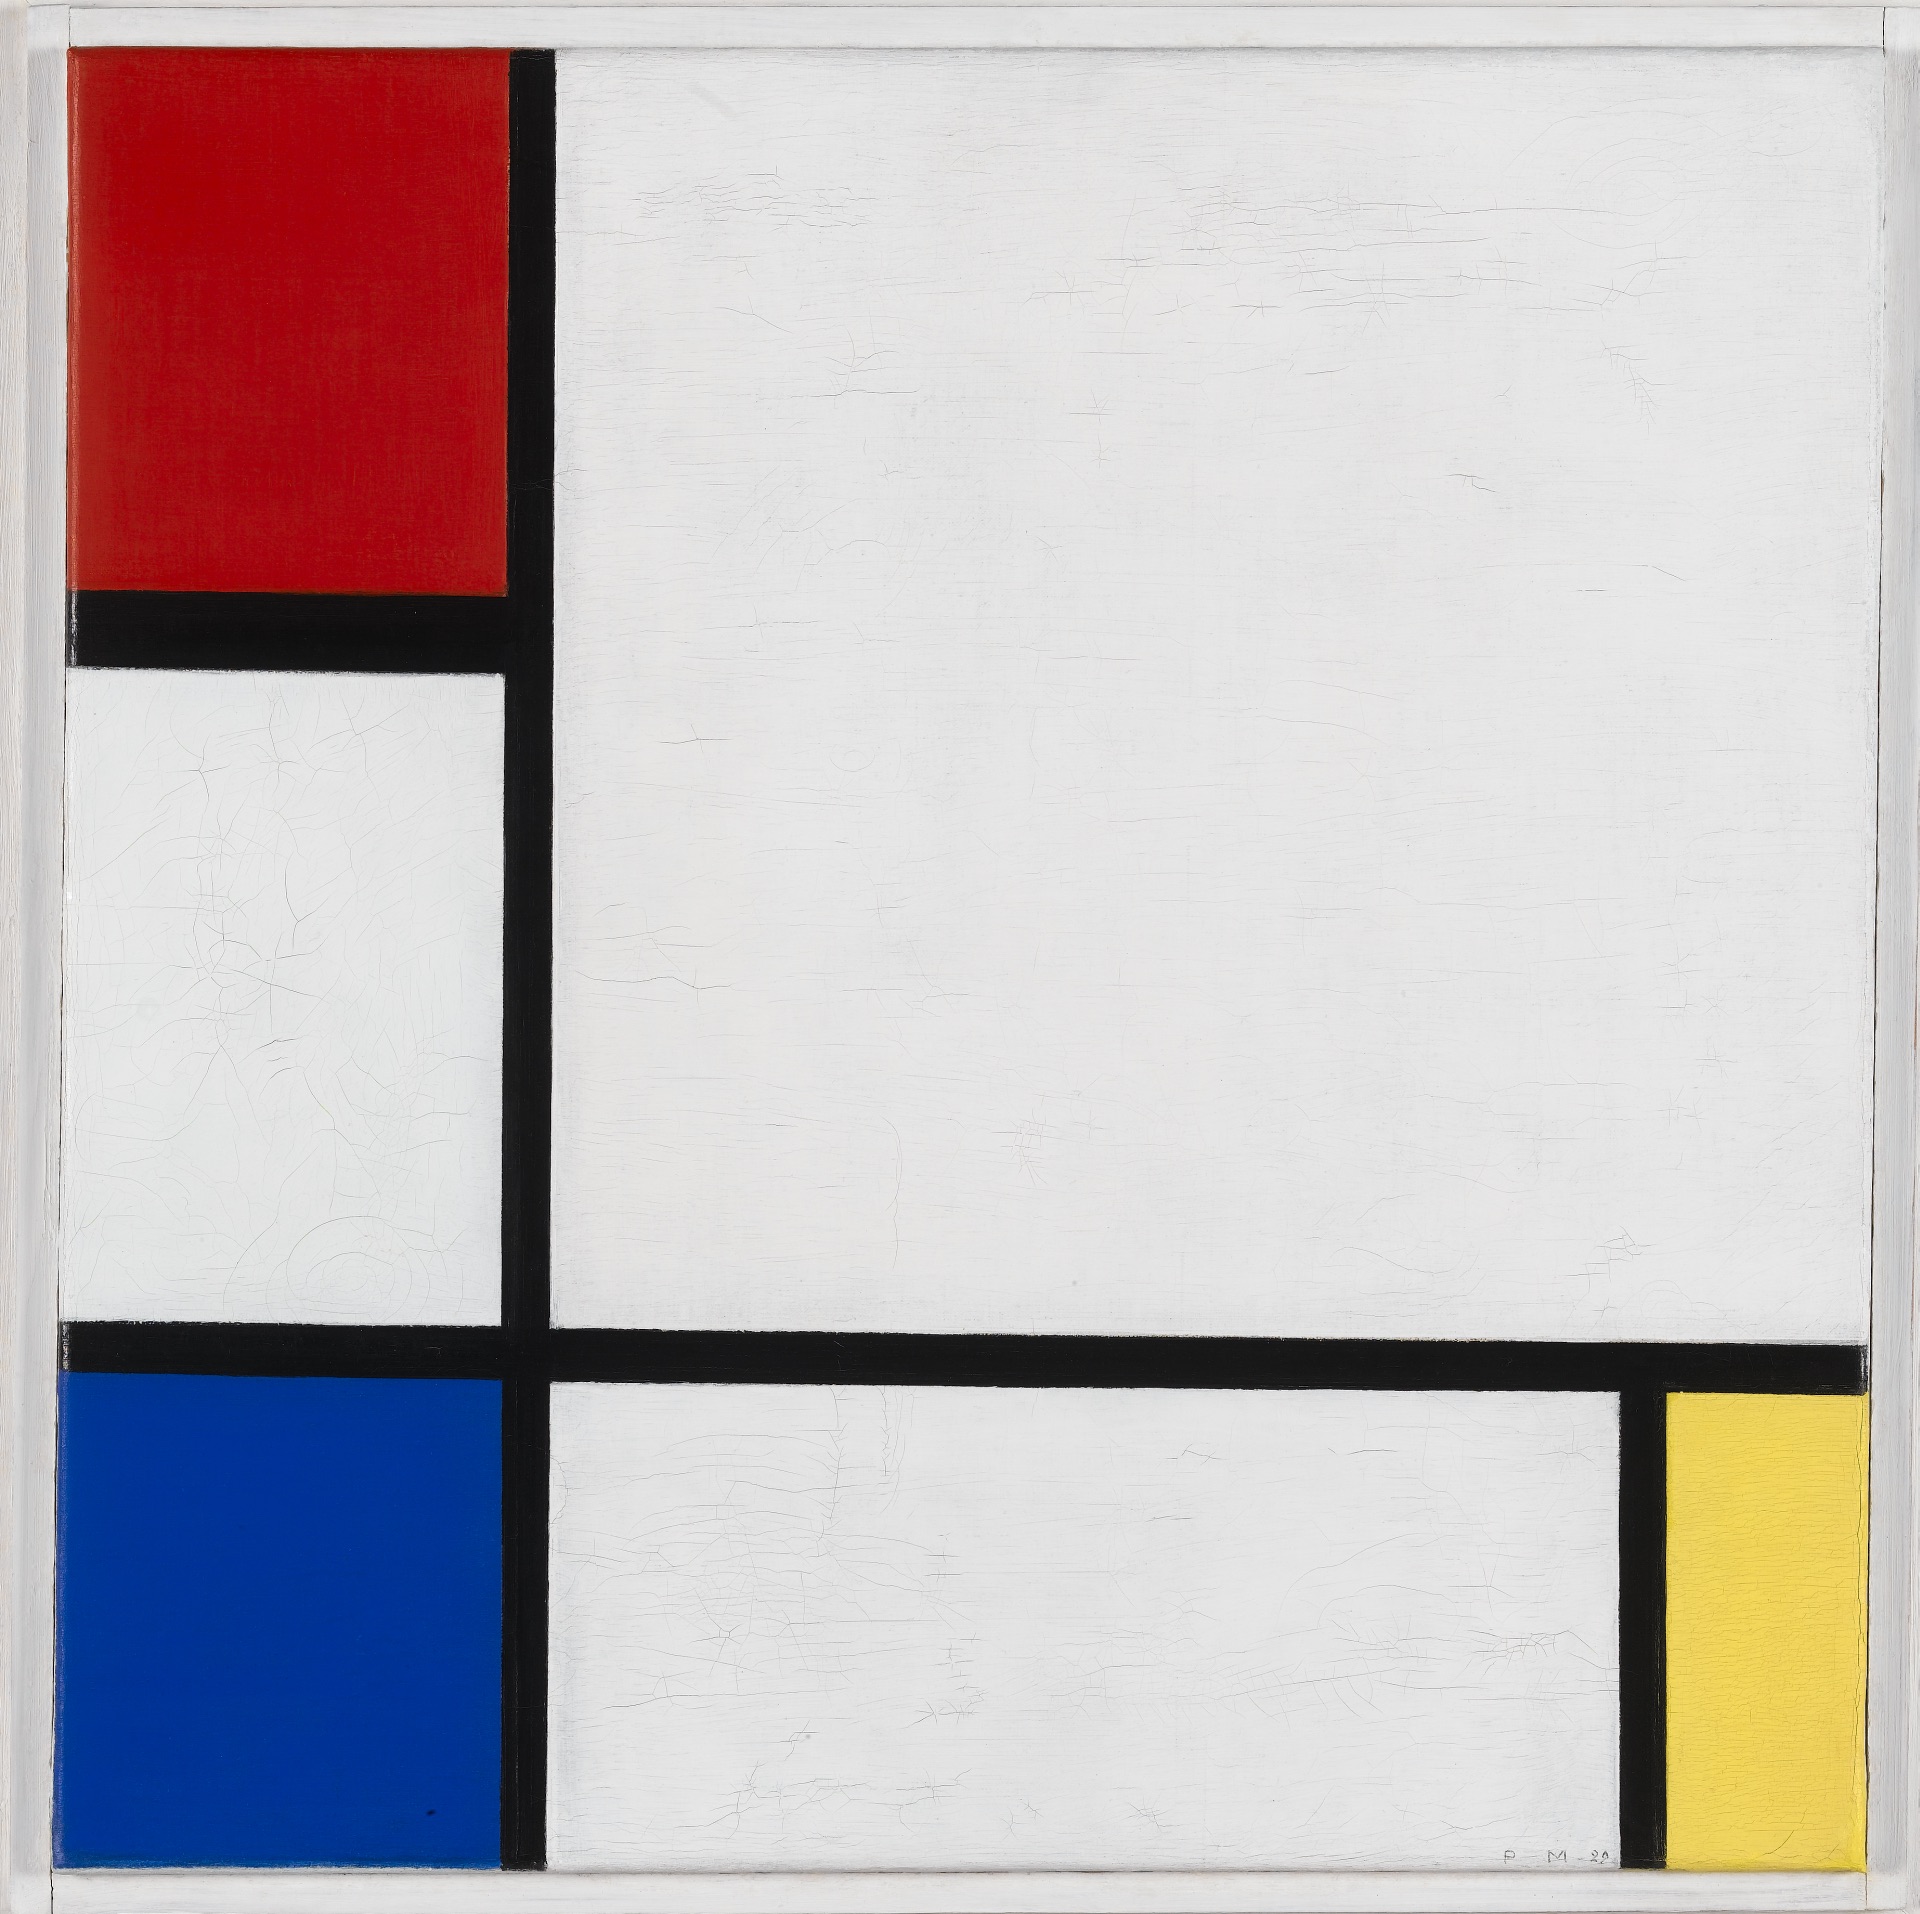 Composition No. IV, with Red, Blue, and Yellow by Piet Mondrian - 1930 - 59,5 cm × 59,5 cm Stedelijk Museum